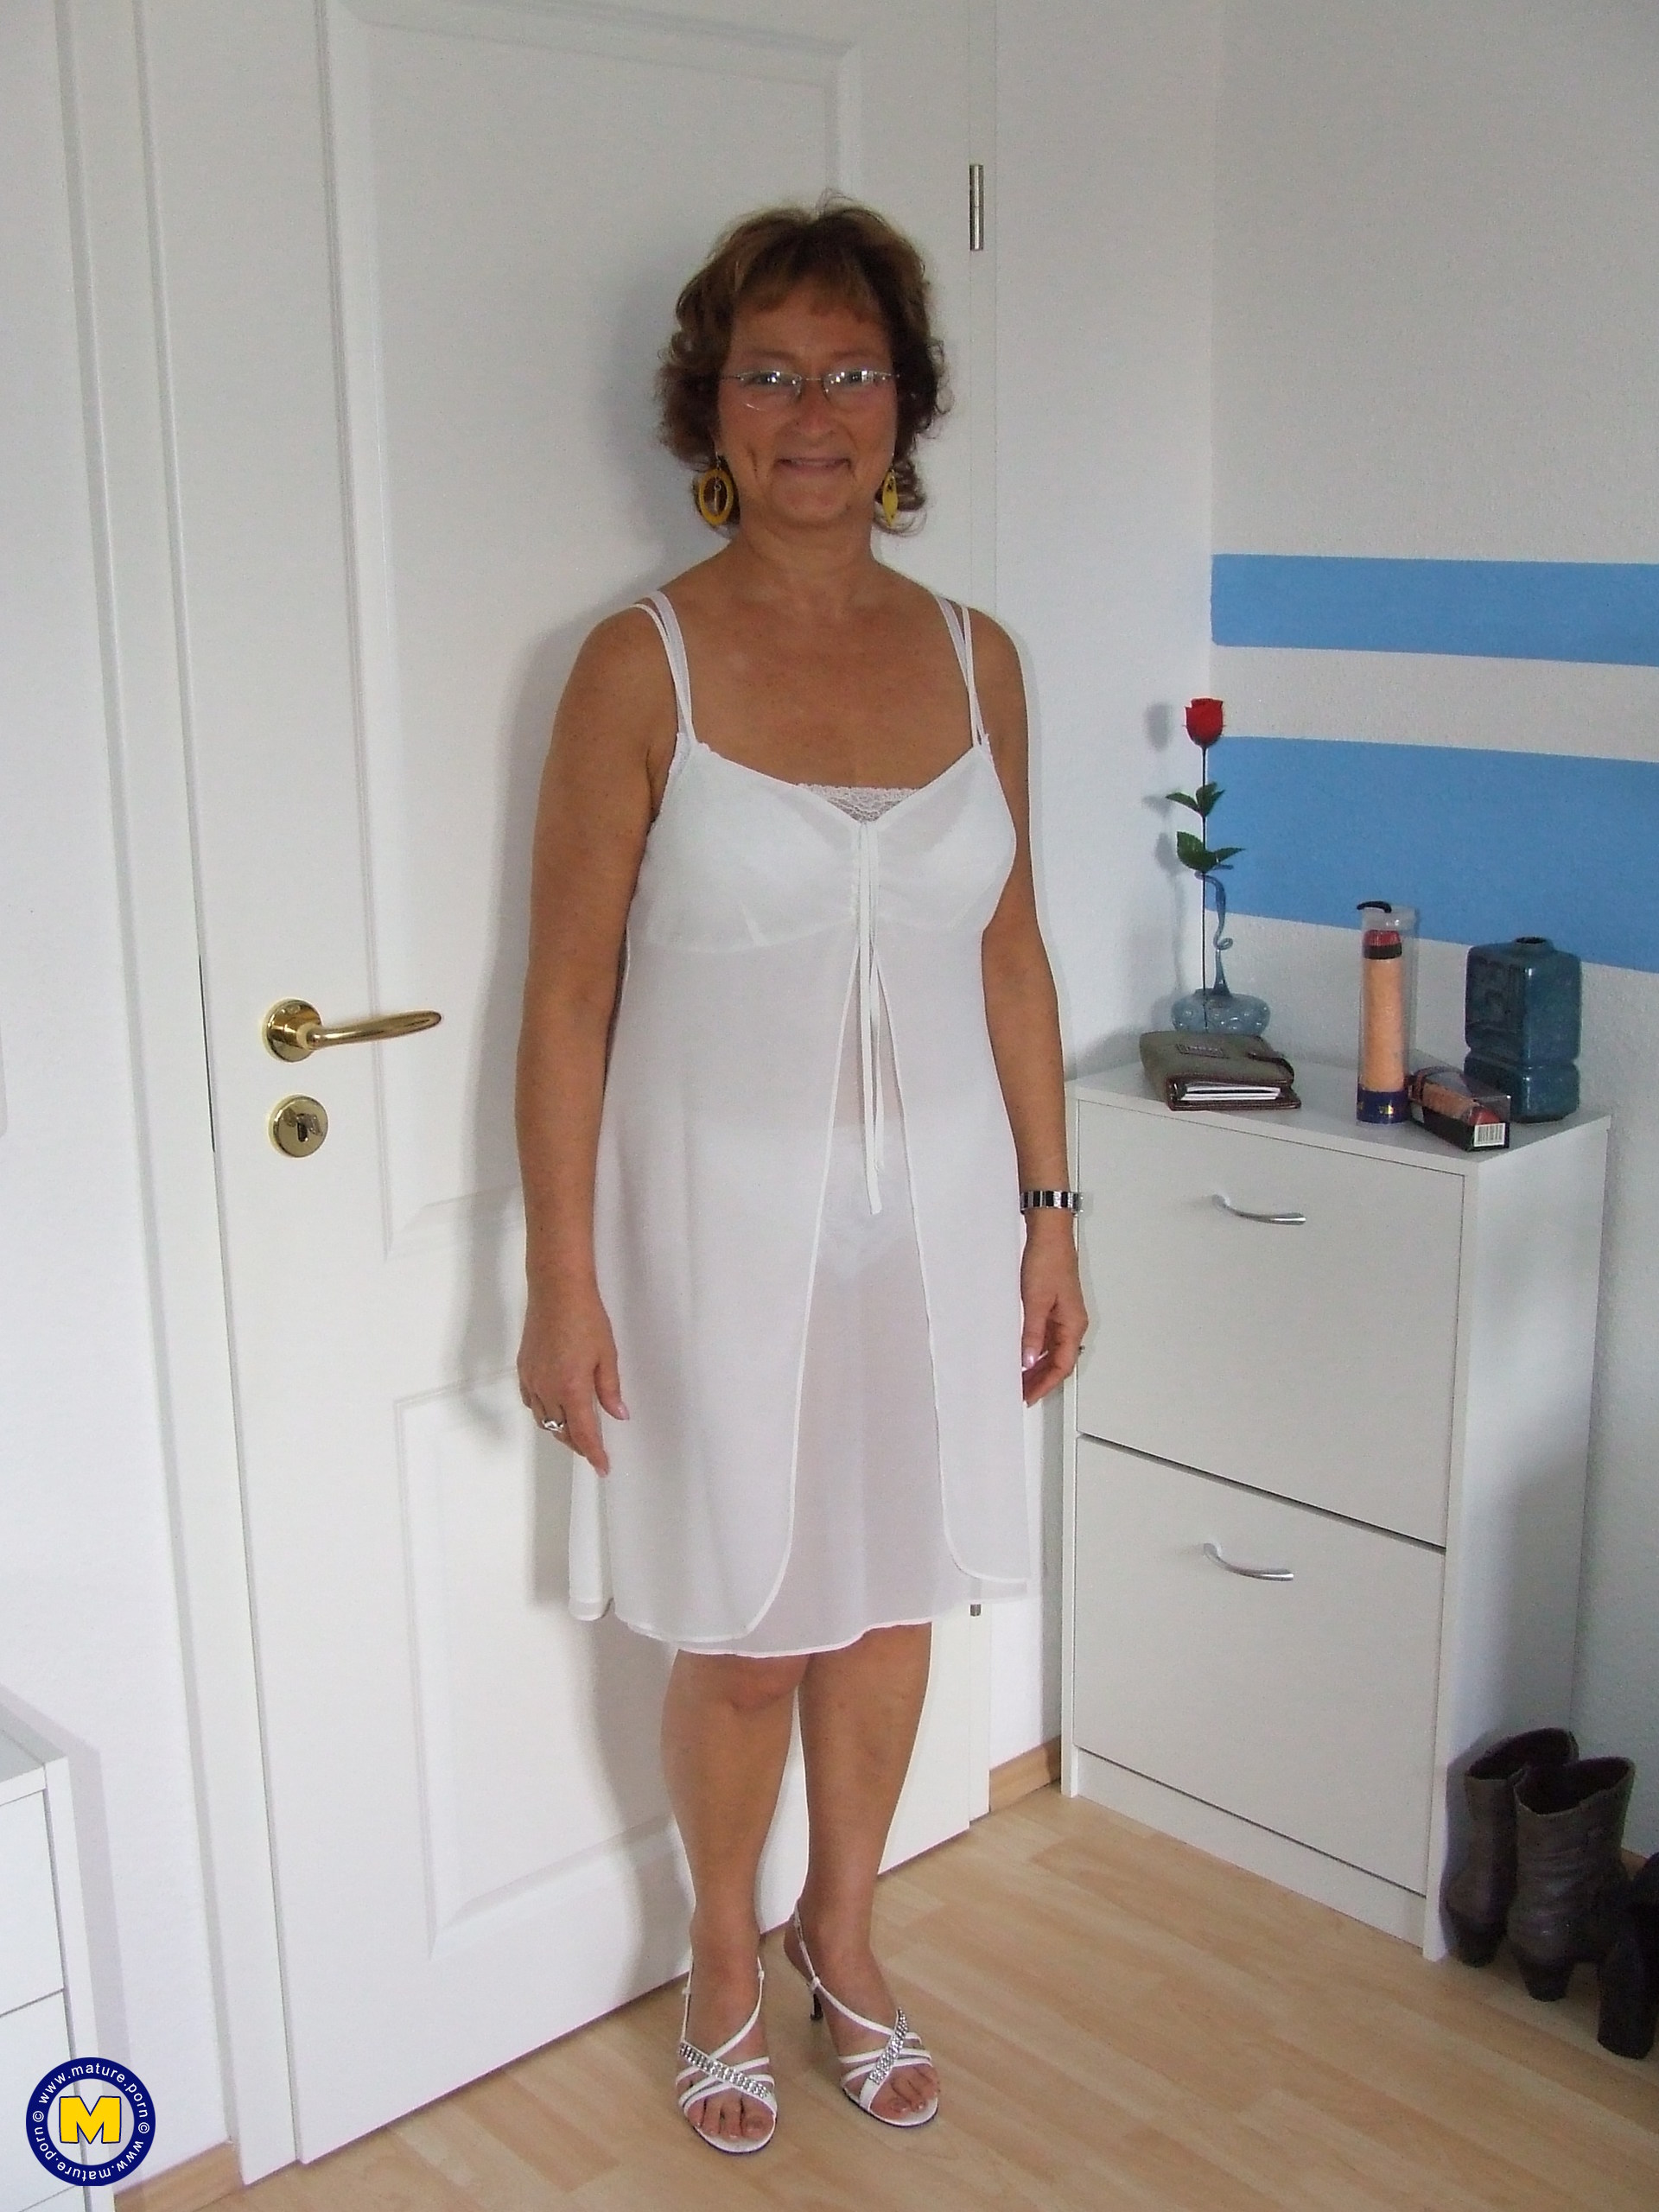 German Mature Amateur Hd - German mature amateur with her glasses on stripping in her bedroom - Mature .nl